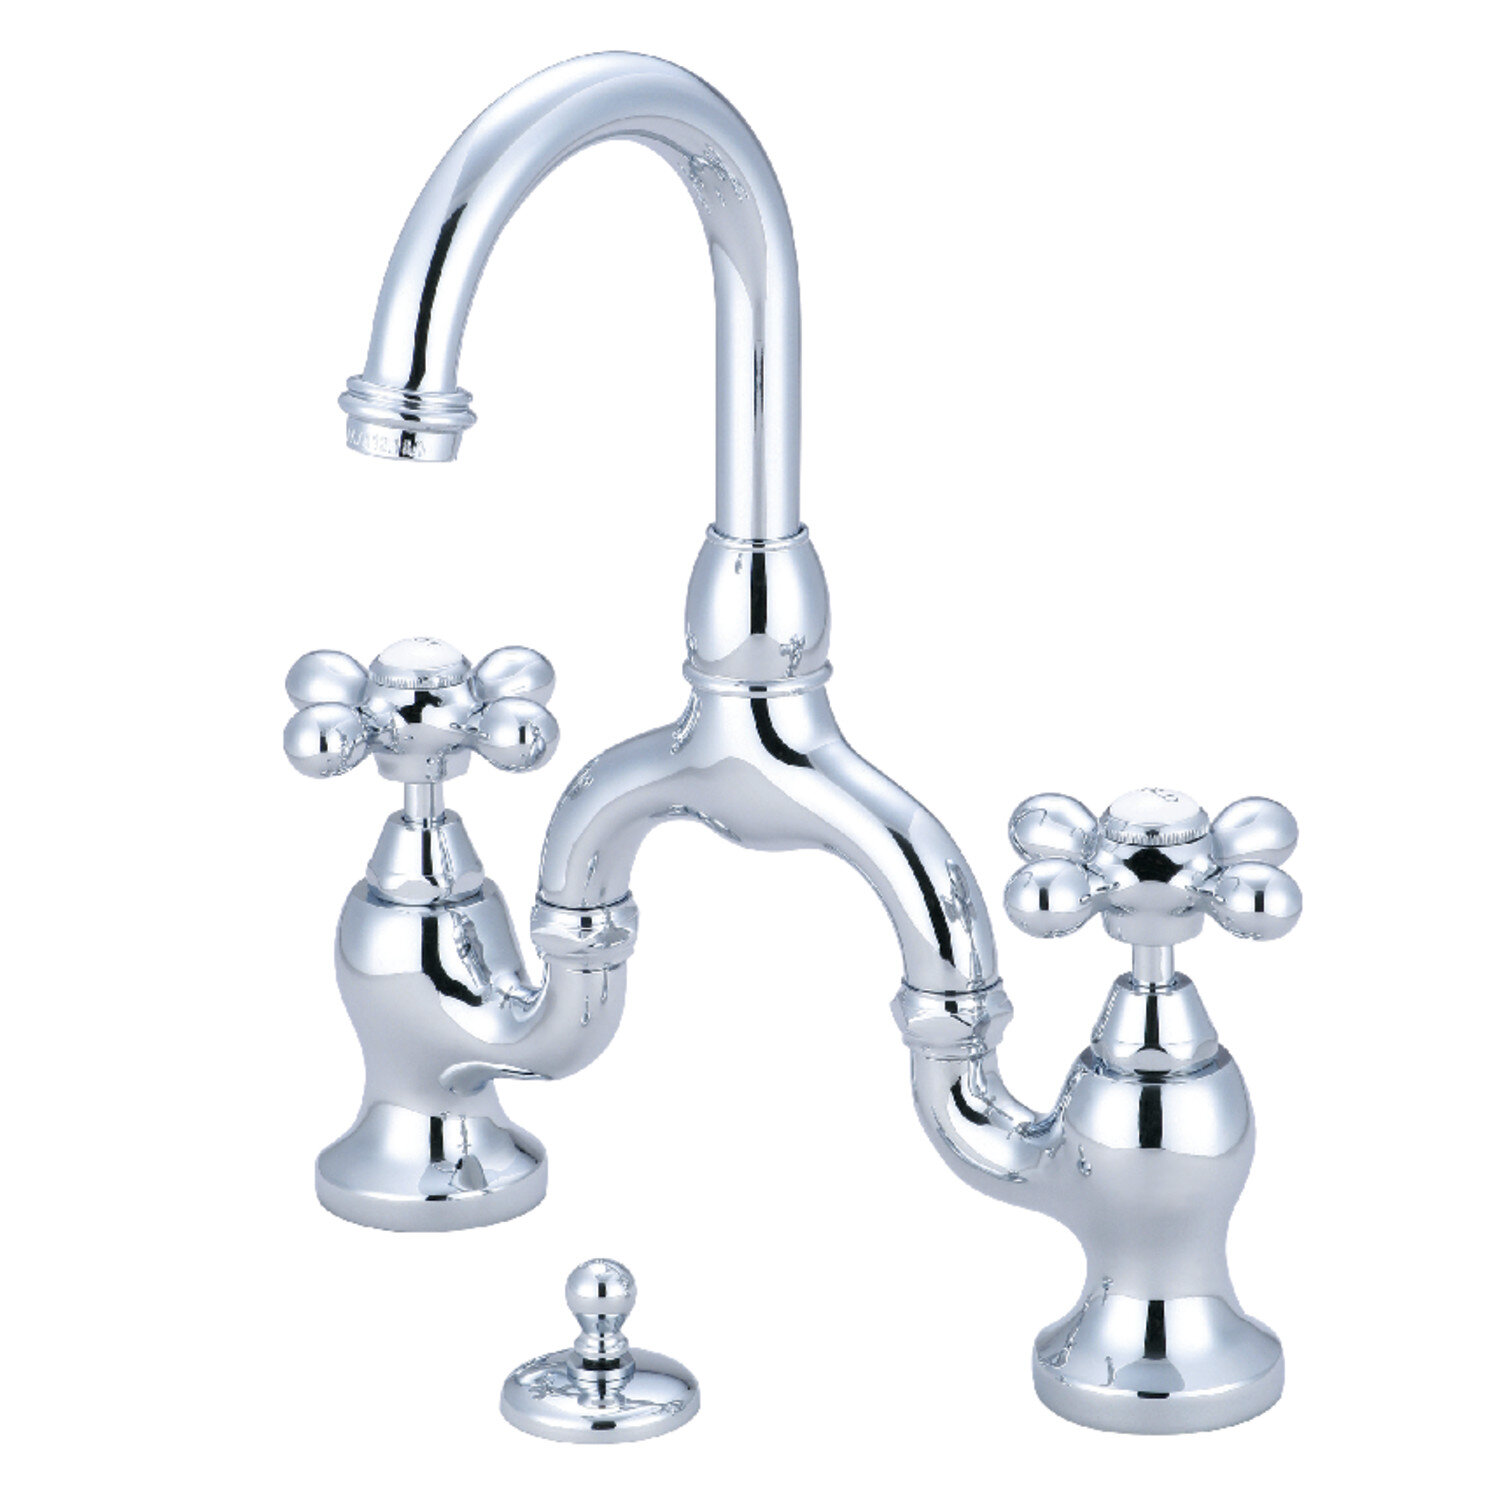 Kingston Brass English Country Bridge Faucet with Accessories